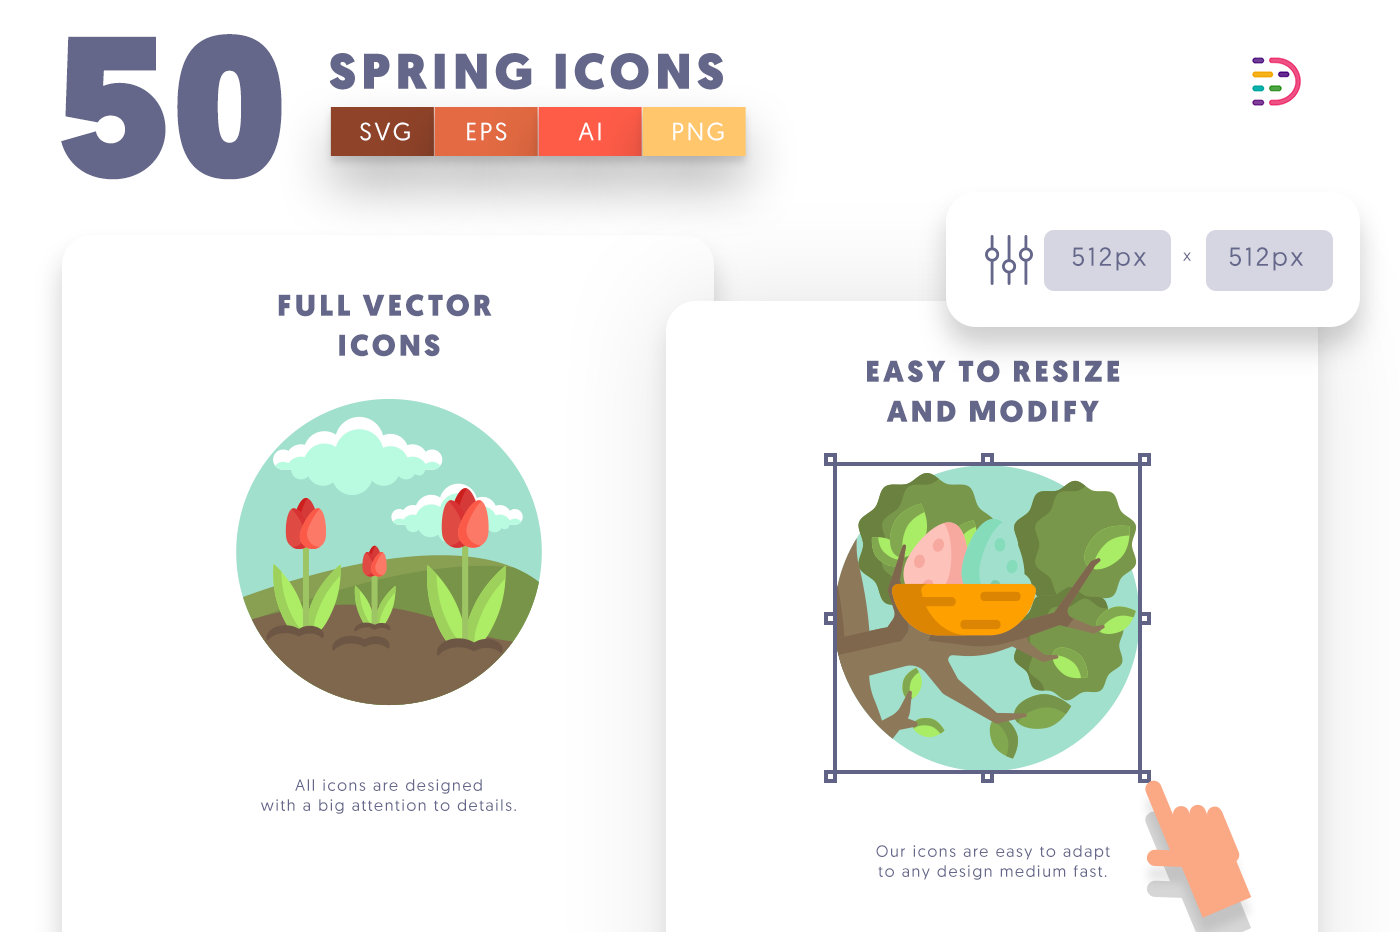 Customizable and vector 50 Spring Icons